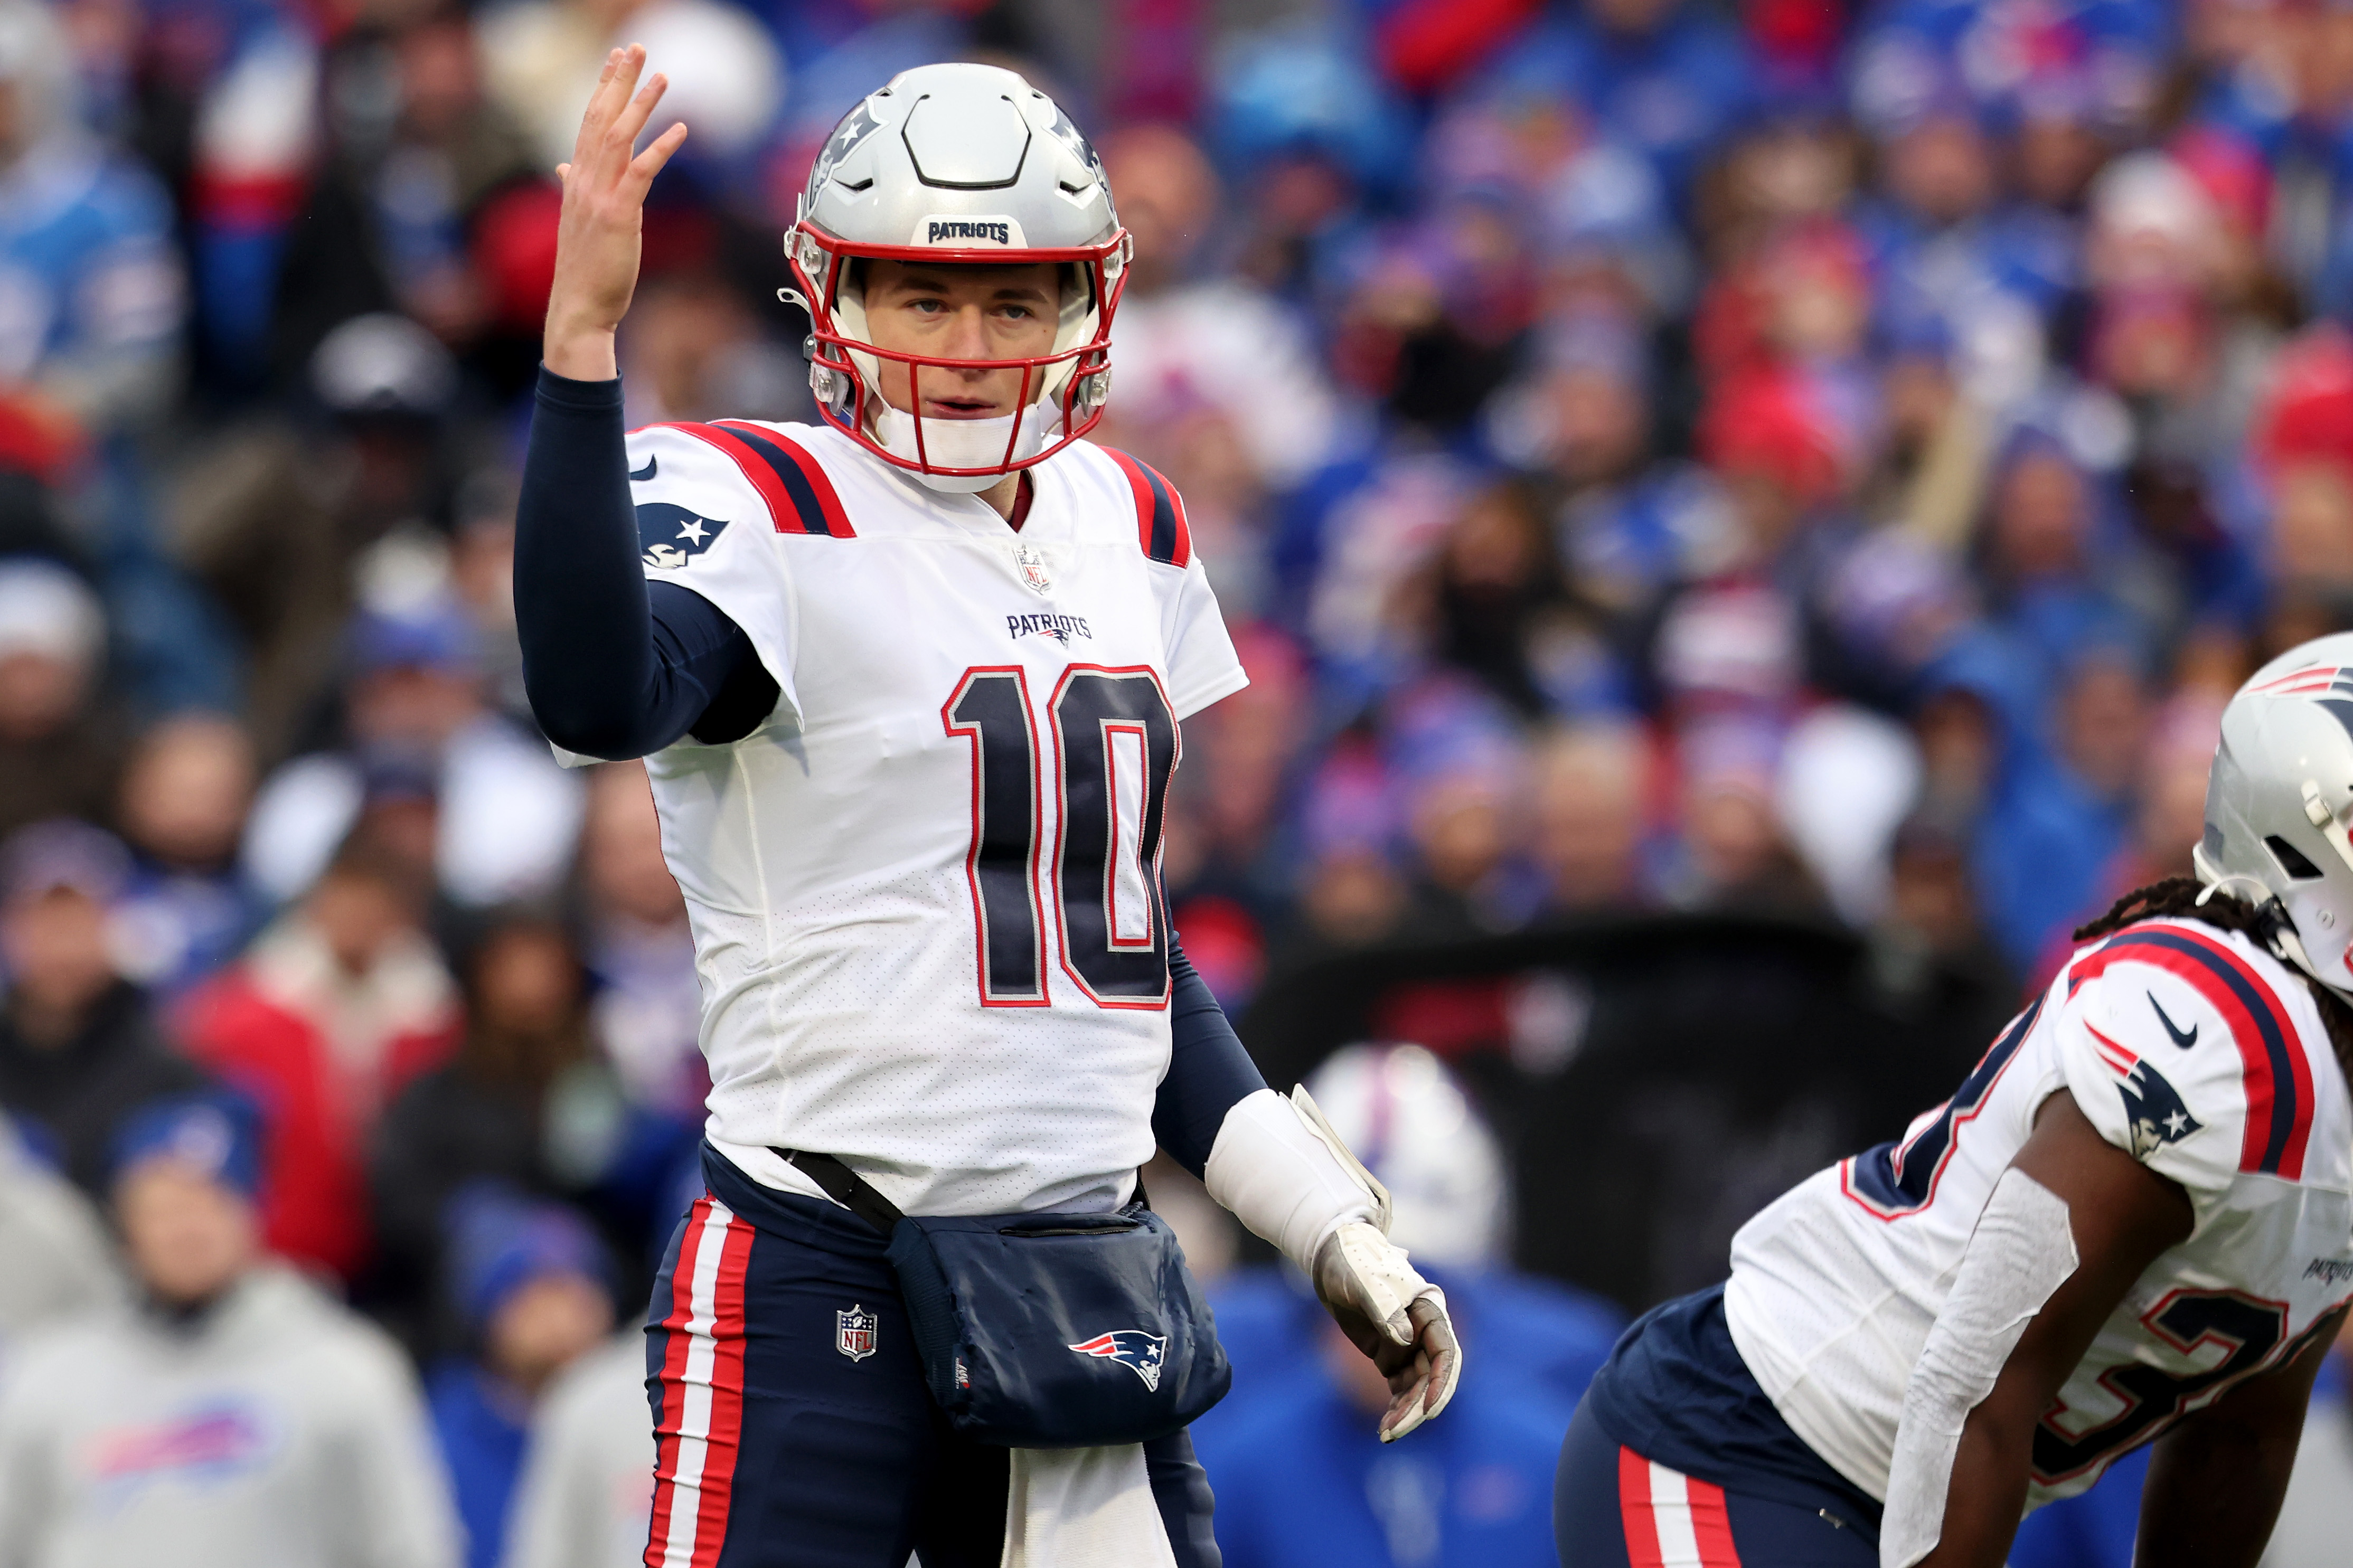 ORCHARD PARK, NEW YORK - JANUARY 08: Mac Jones #10 of the New England Patriots signals during the second quarter against the Buffalo Bills at Highmark Stadium on January 08, 2023 in Orchard Park, New York.